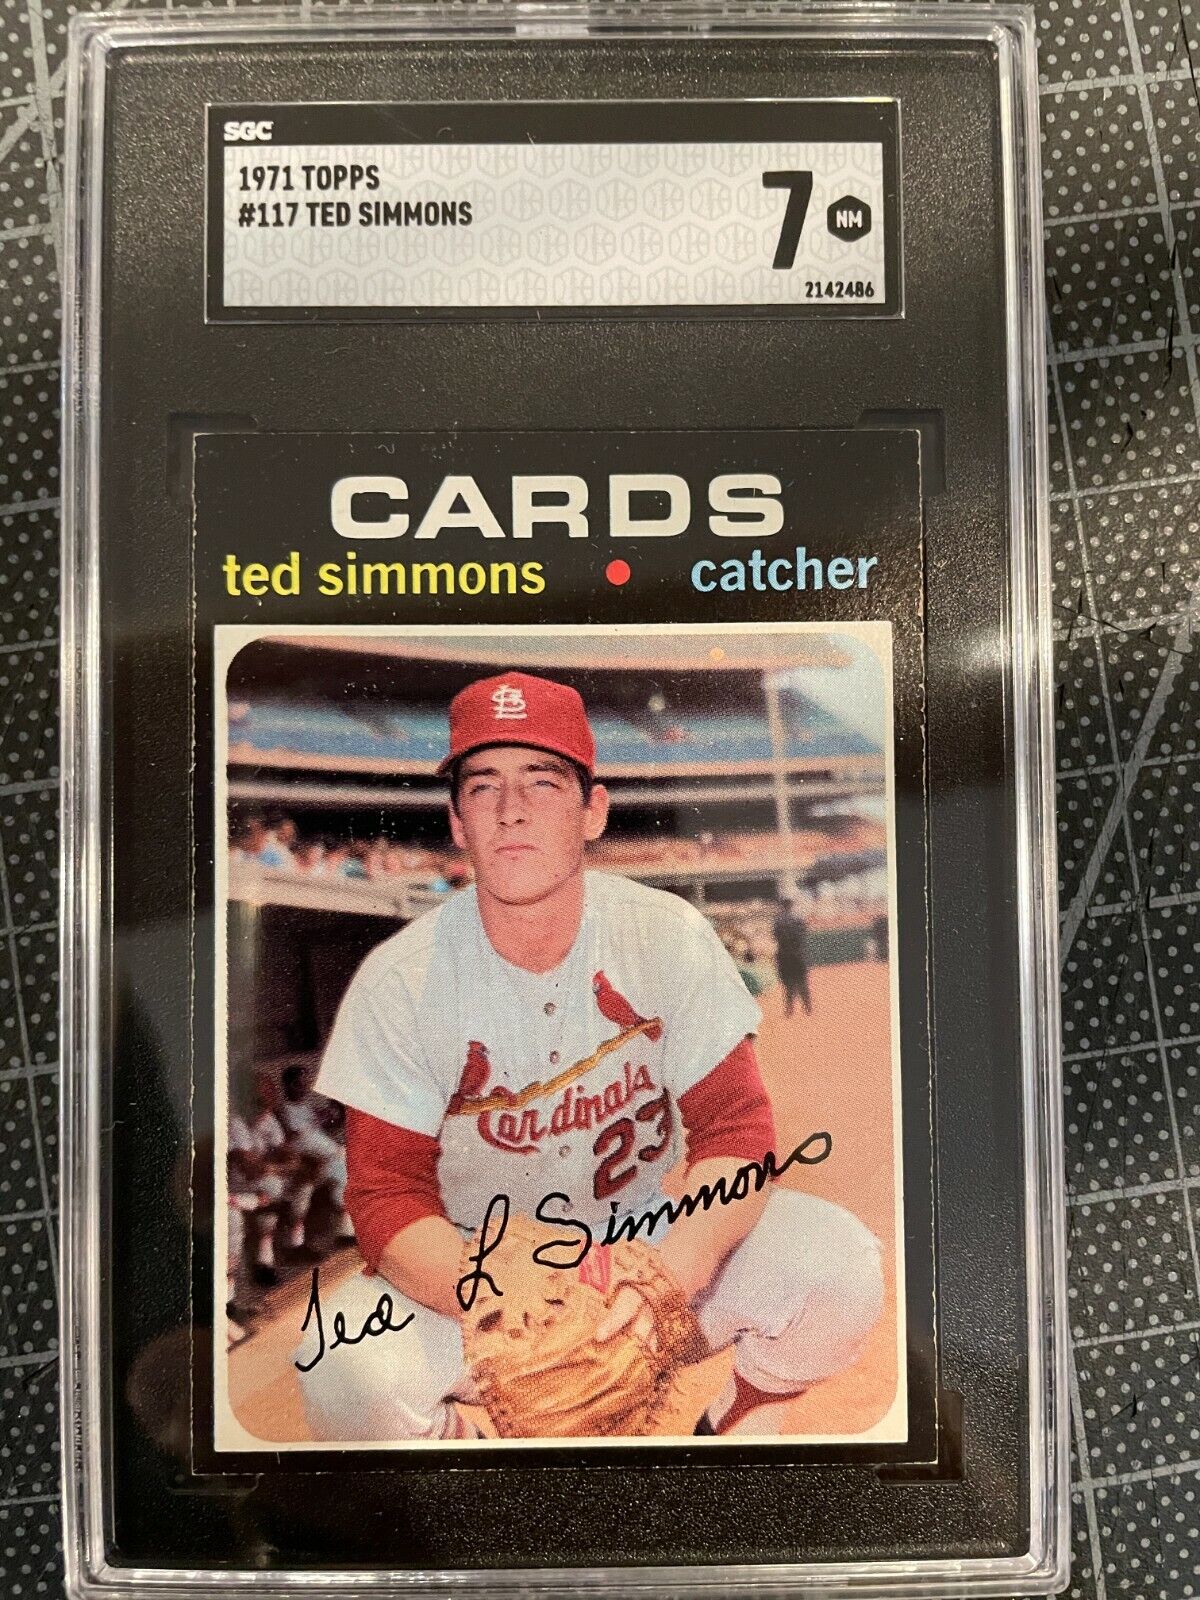 1971 TOPPS #117 TED SIMMONS ST. LOUIS CARDINALS ROOKIE BASEBALL CARD SGC 7 NM 3. rookie card picture